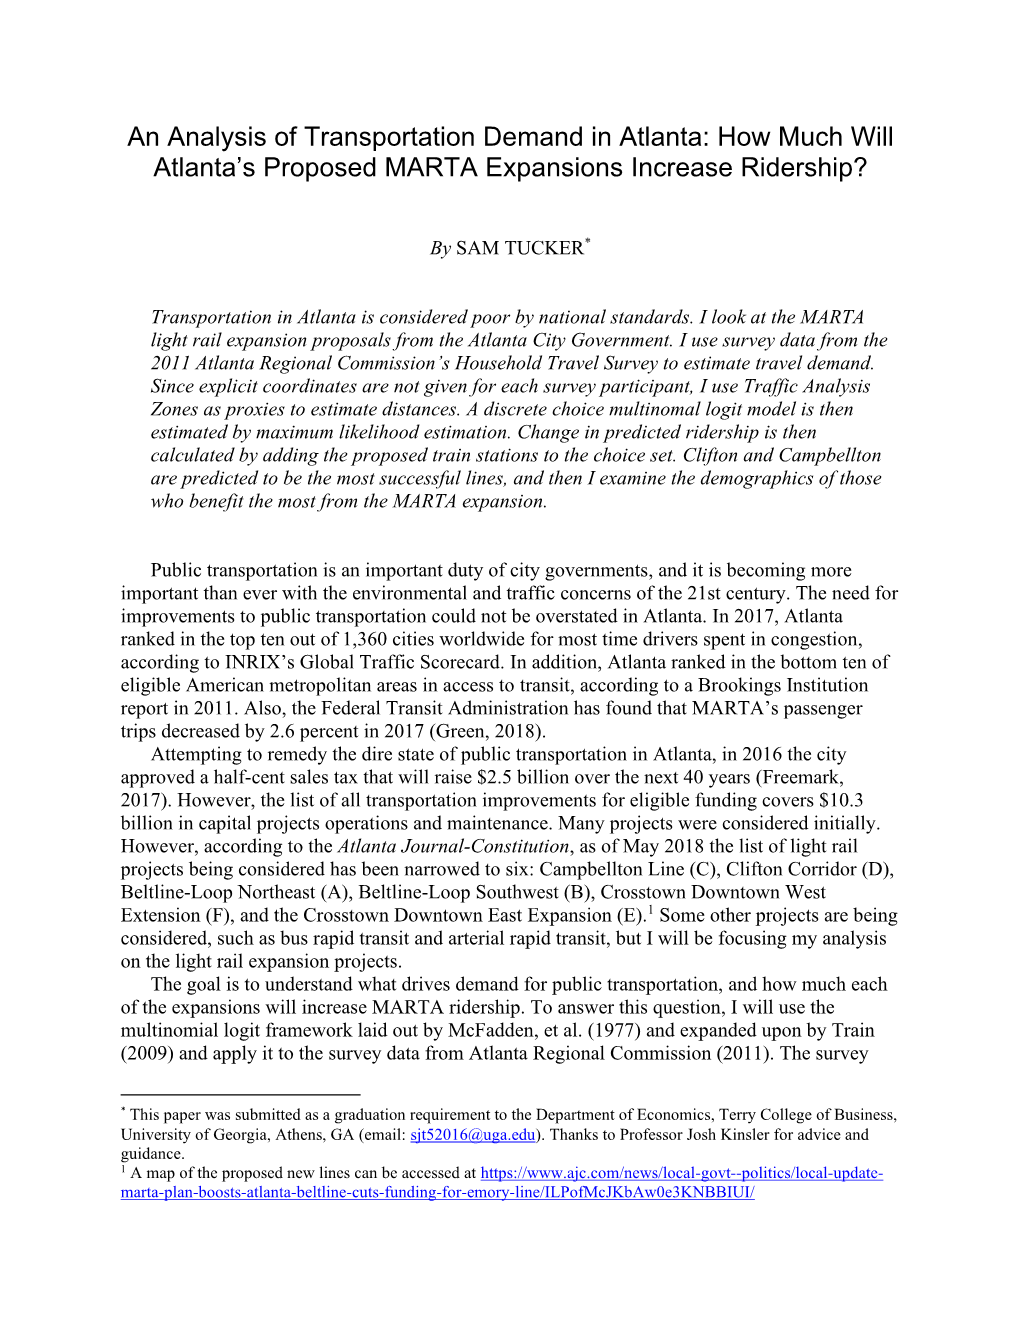 An Analysis of Transportation Demand in Atlanta: How Much Will Atlanta’S Proposed MARTA Expansions Increase Ridership?